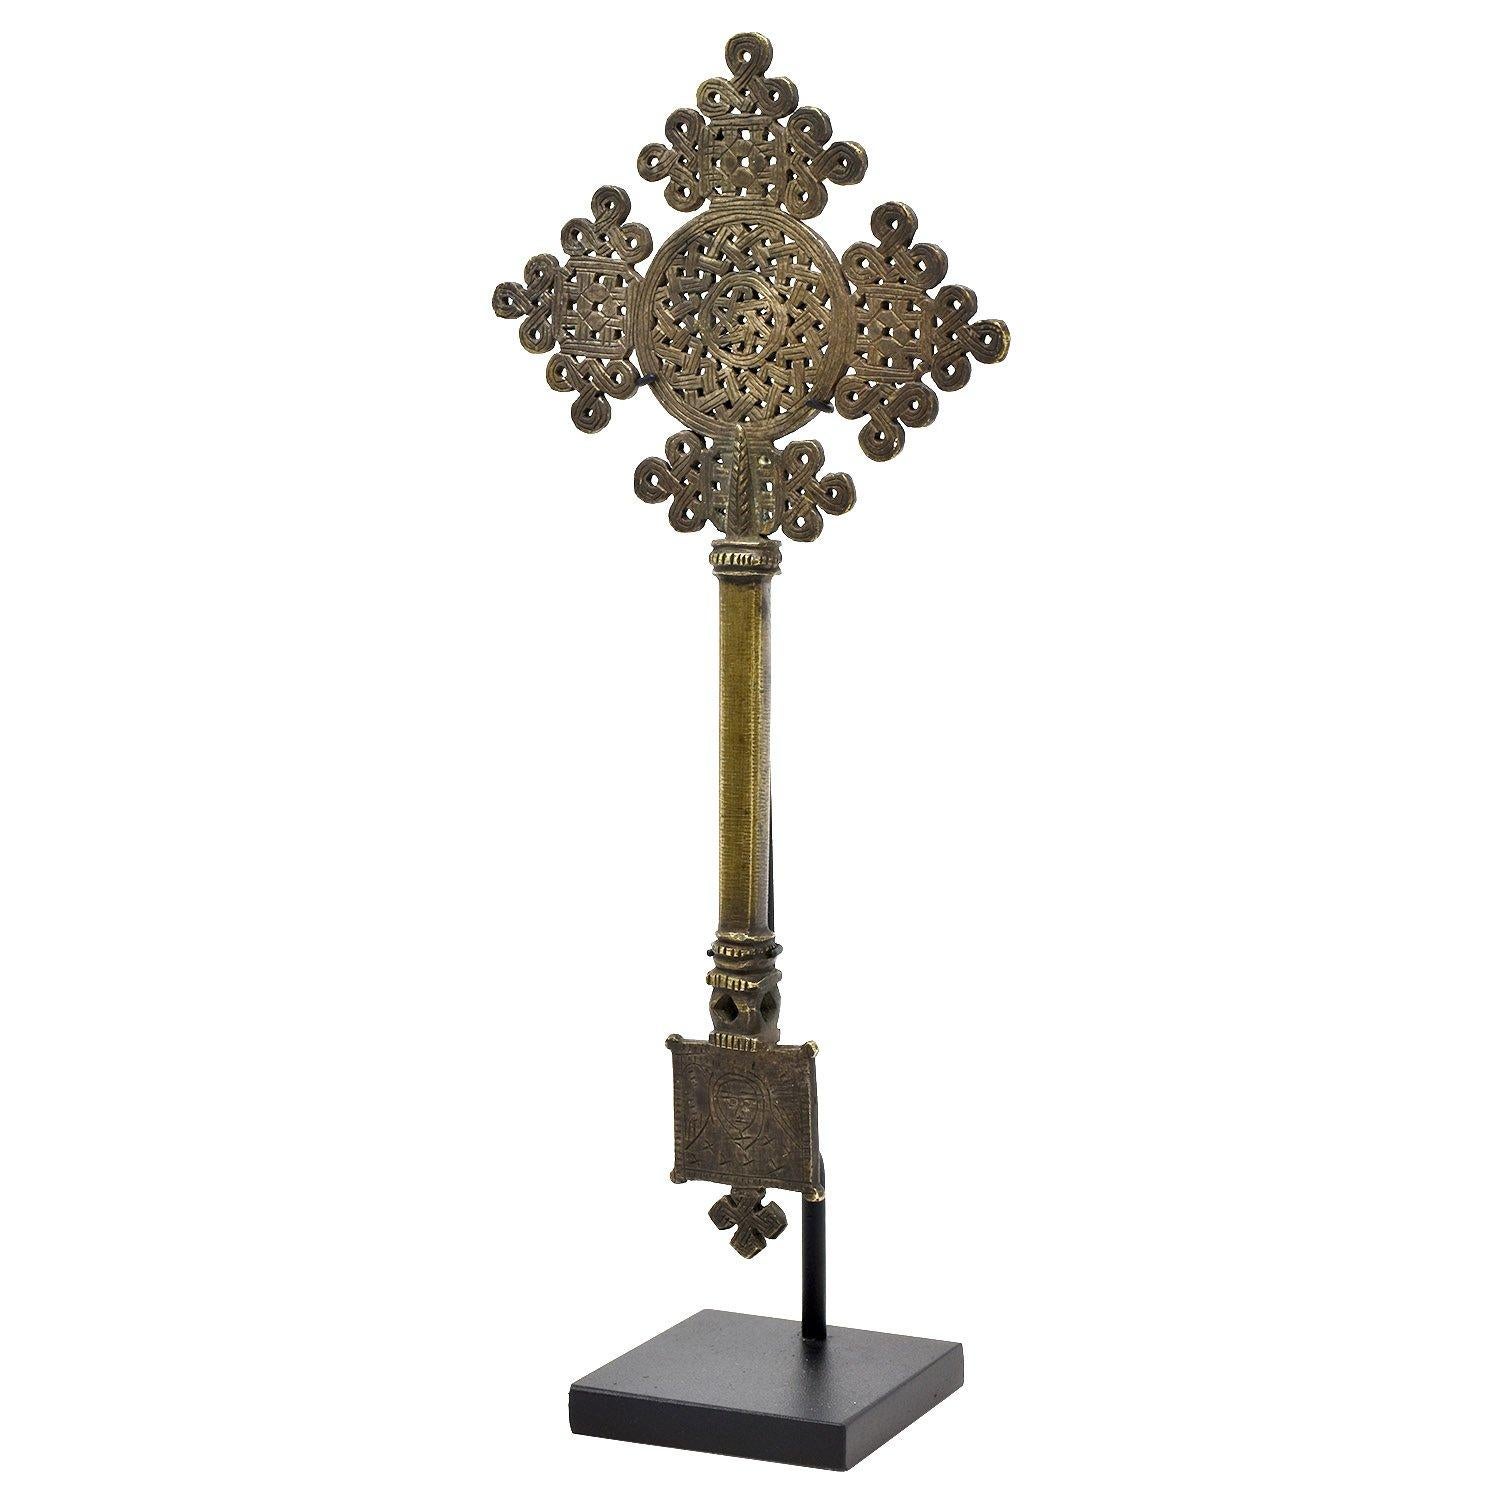 Coptic hand cross, Ethiopia

Carried by hand during services
Ethiopia
Copper alloy
Mid 20th century
Measures: 9 x 4.25 x 0.5 in. / 23 x 11 x 1 cm
Height on custom display stand: 10 in. / 25 cm.